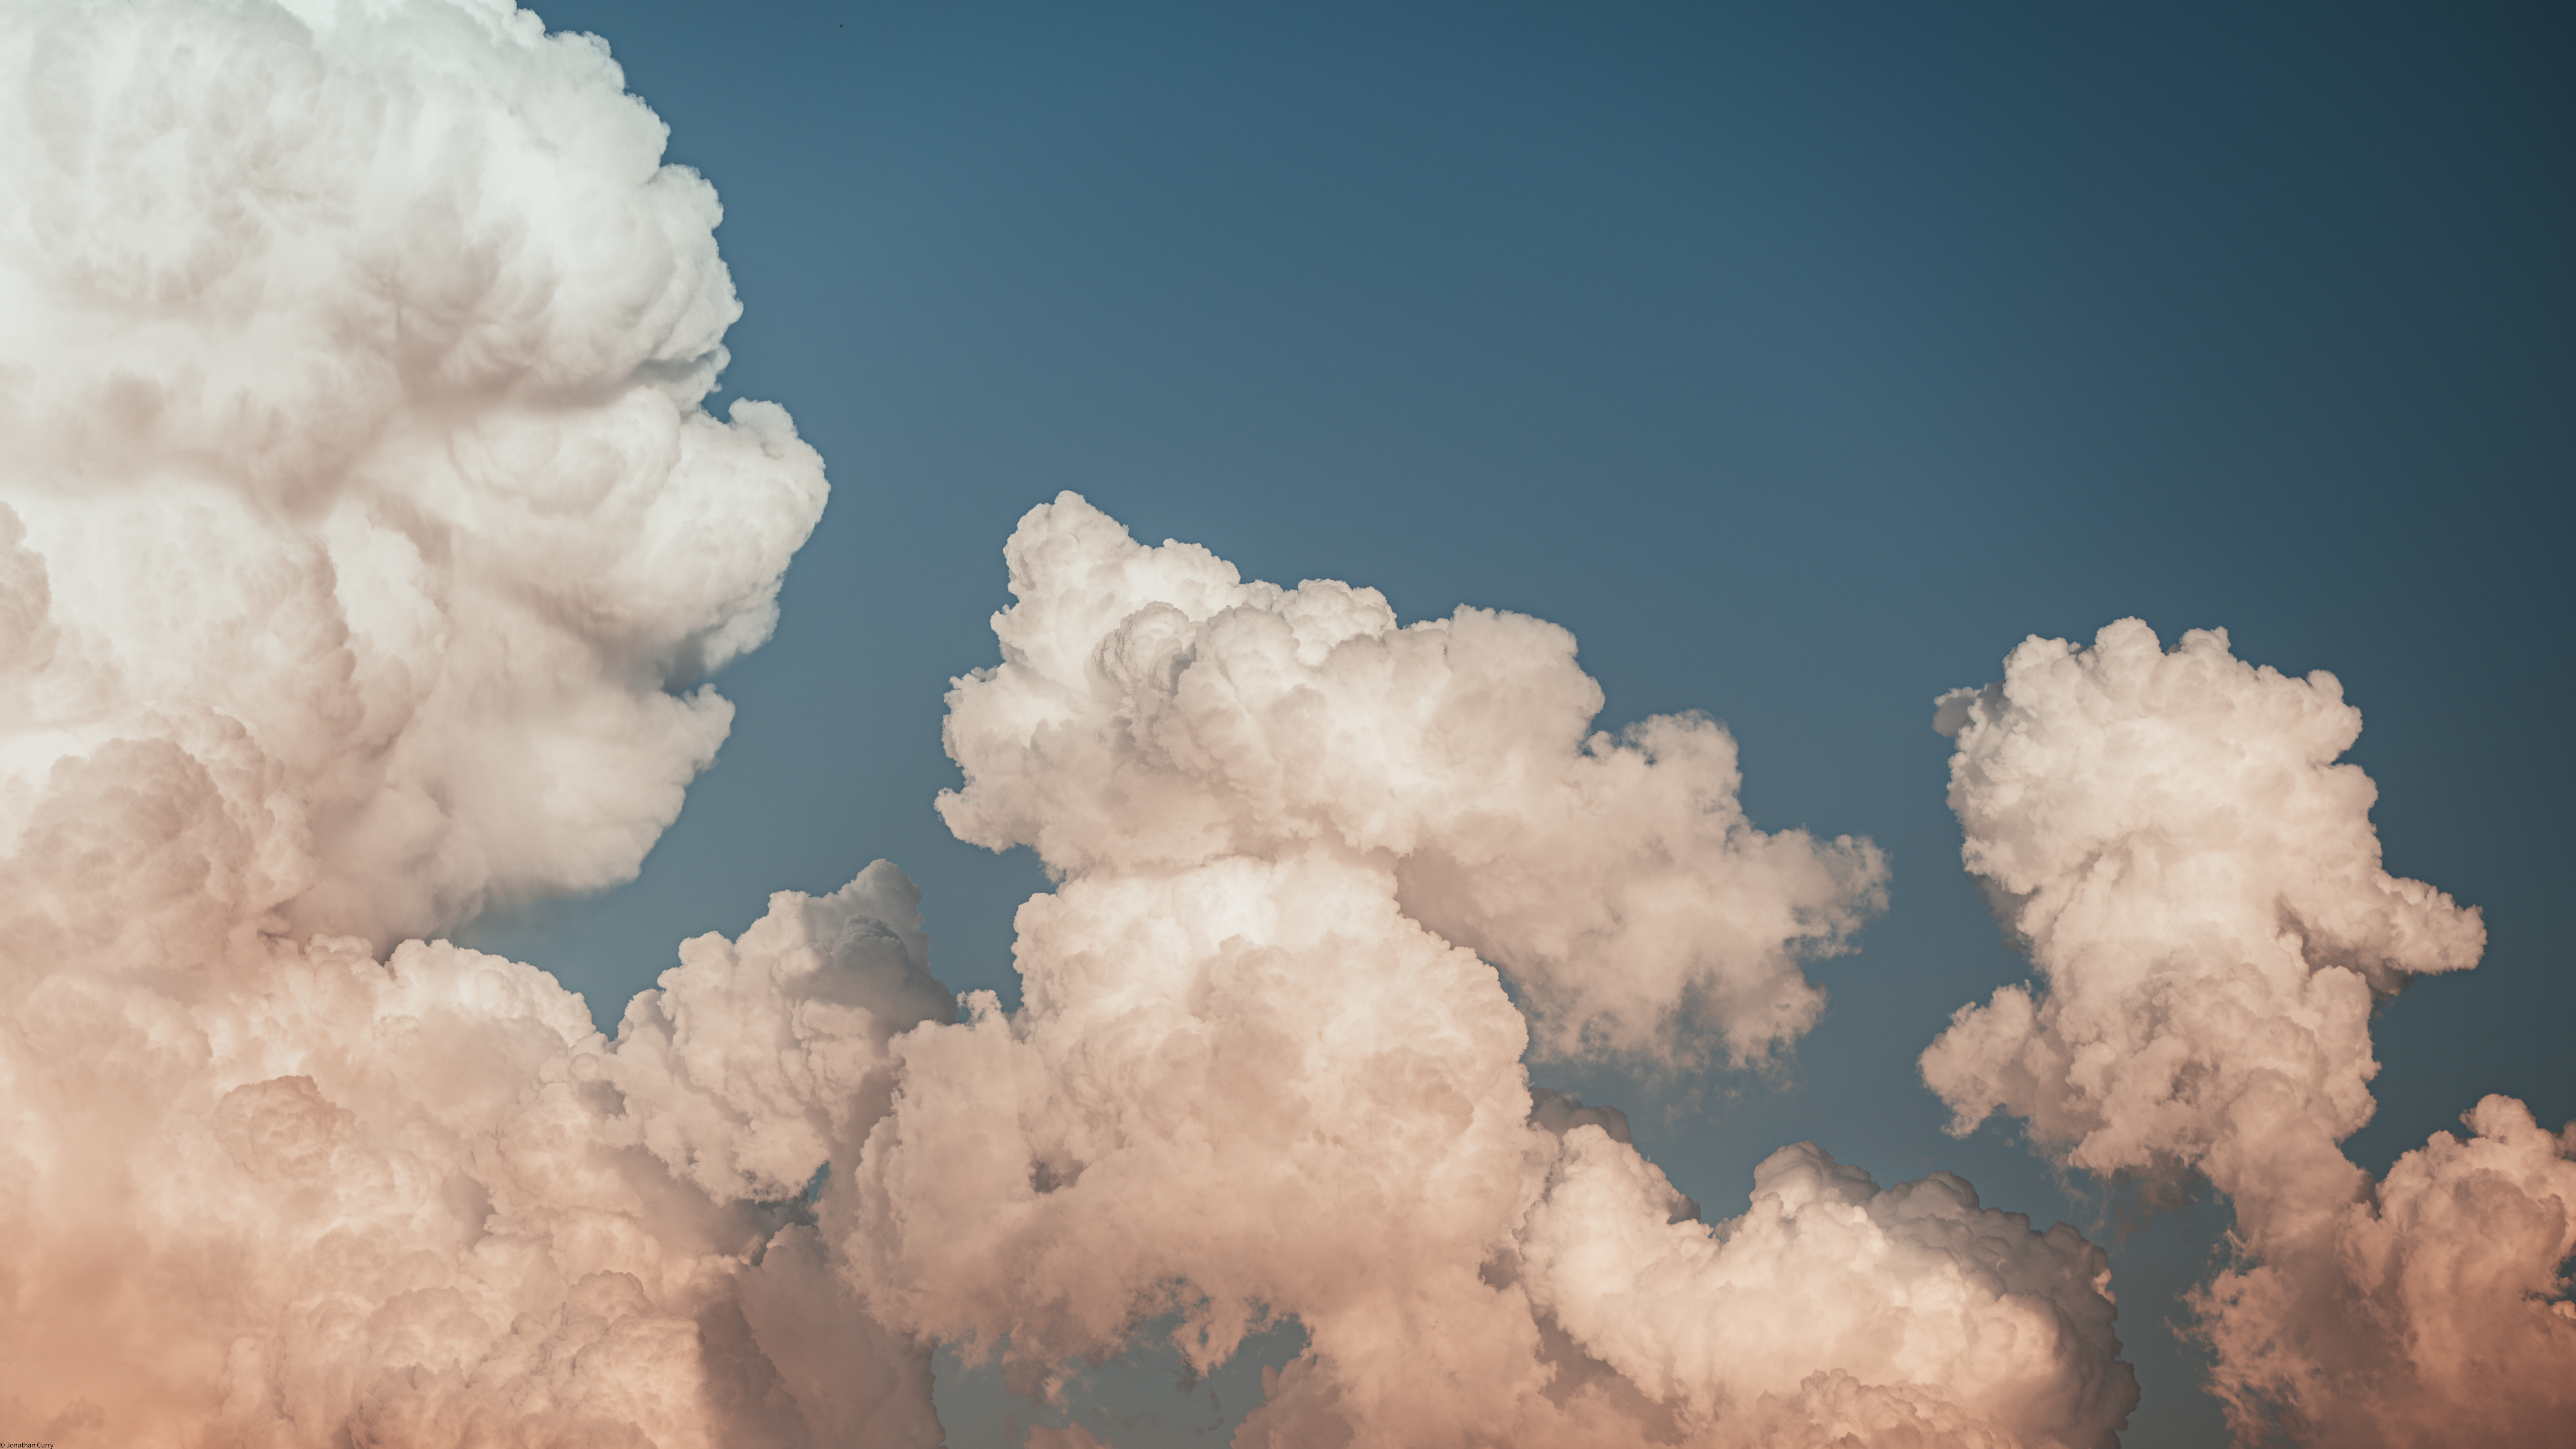 Clouds Jonathan Curry Nature Sky Outdoors Photography Vintage Landscape Natural Light Bright 6016x3384